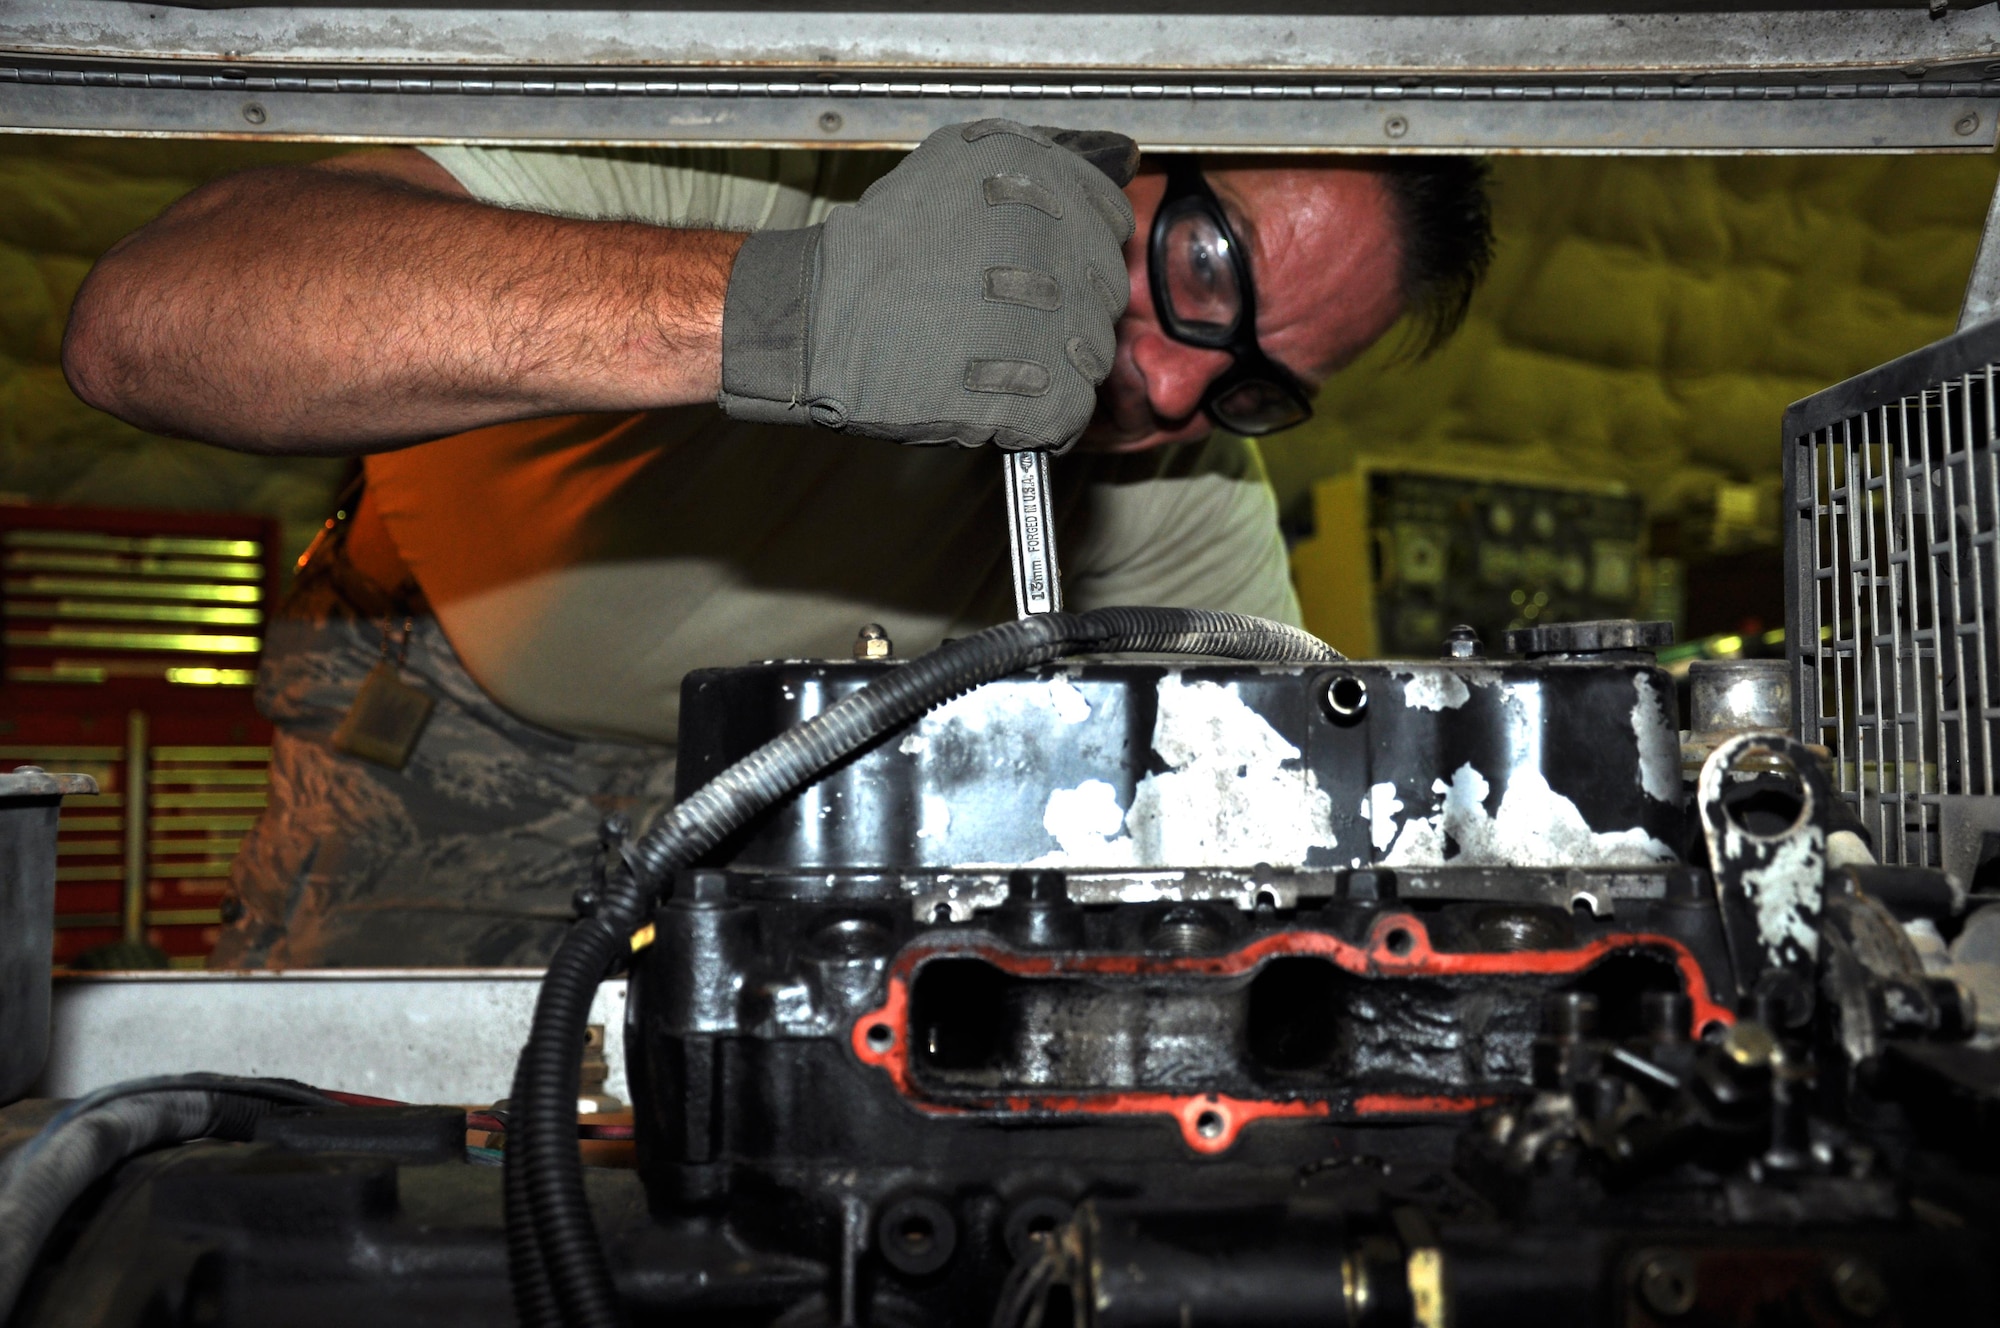 Staff Sergeant Jordan LeMay, the 386th Expeditionary Civil Engineer Squadron NCO in charge of light carts, loosens a rusted exhaust manifold bolt during a light cart teardown at the 386 ECES Power Production facility Wednesday, May 17, 2017.  This cart was being converted to run off of the base power grid. (U.S. Air Force photo/Master Sgt. Eric Sharman)